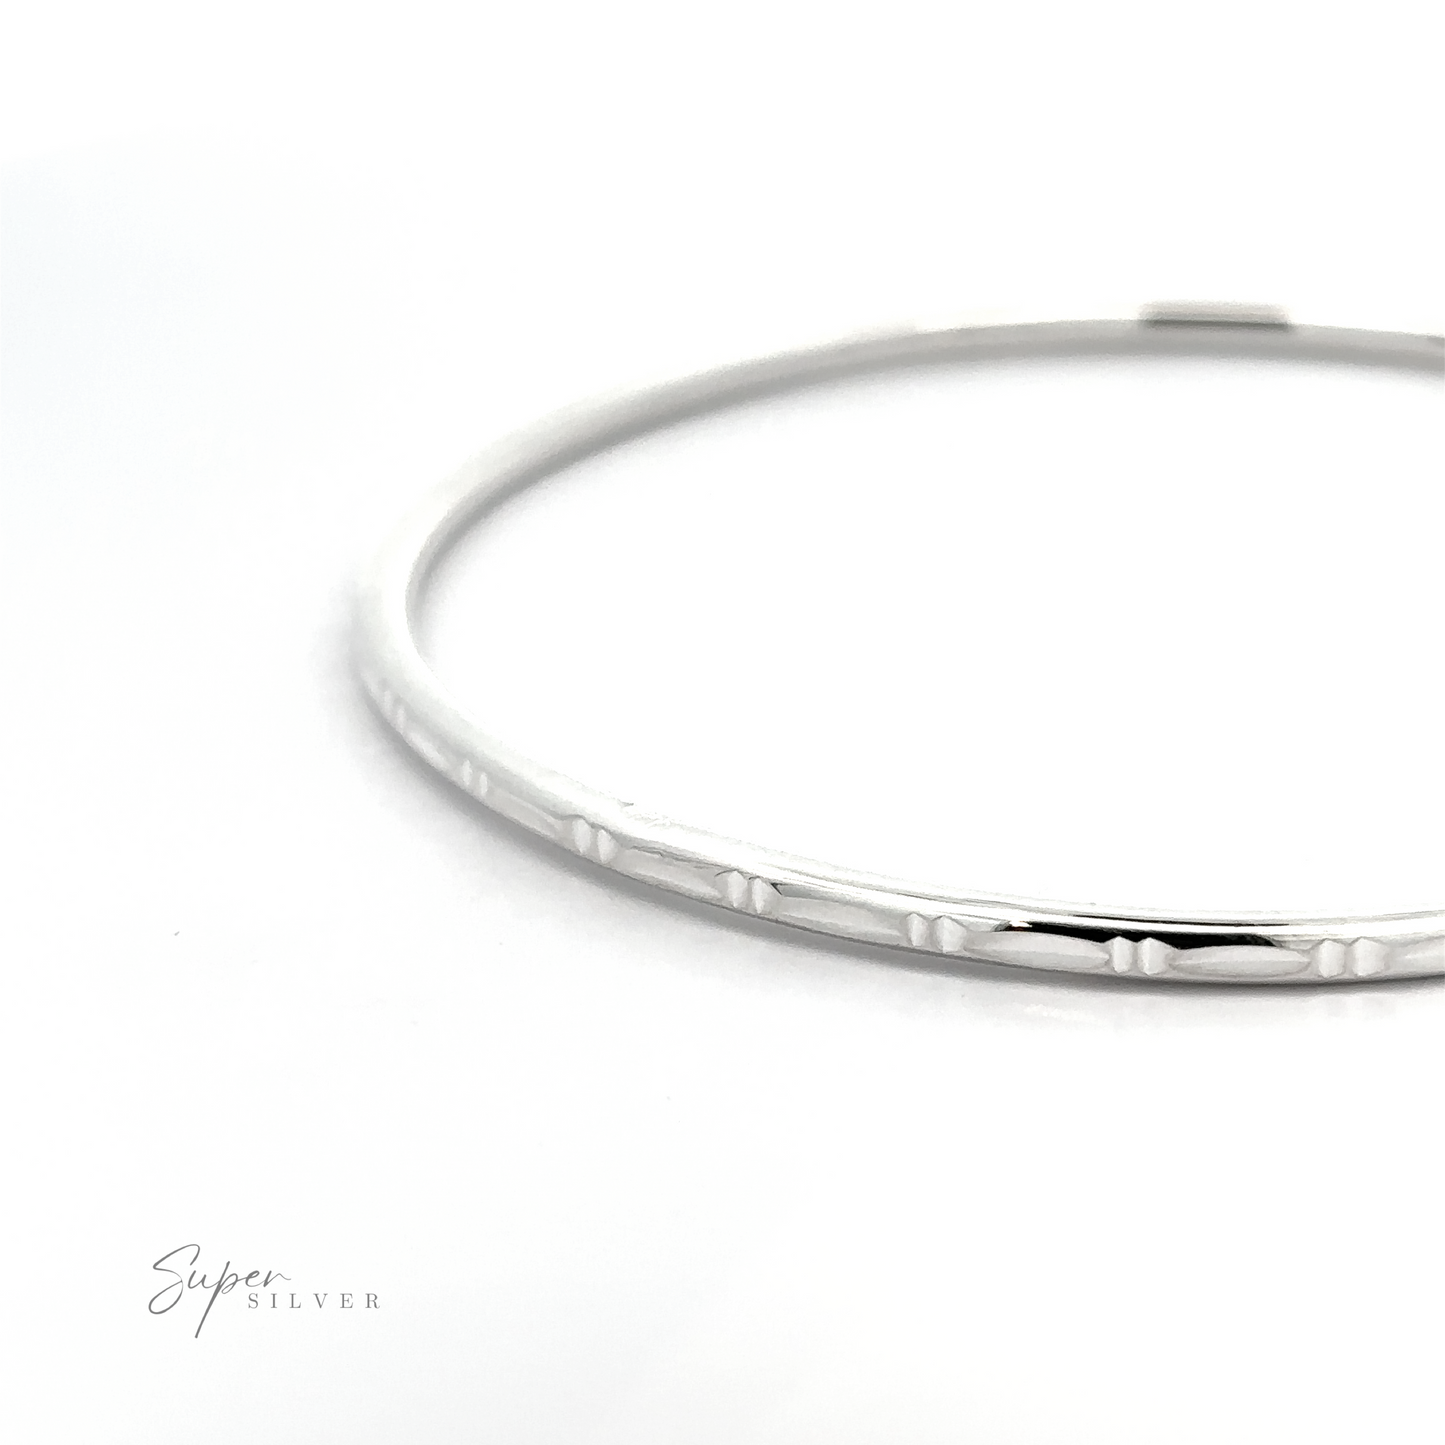 A Silver Bangle Bracelet with Faceted Cut bangle bracelet with a textured pattern and bamboo facet cut design.